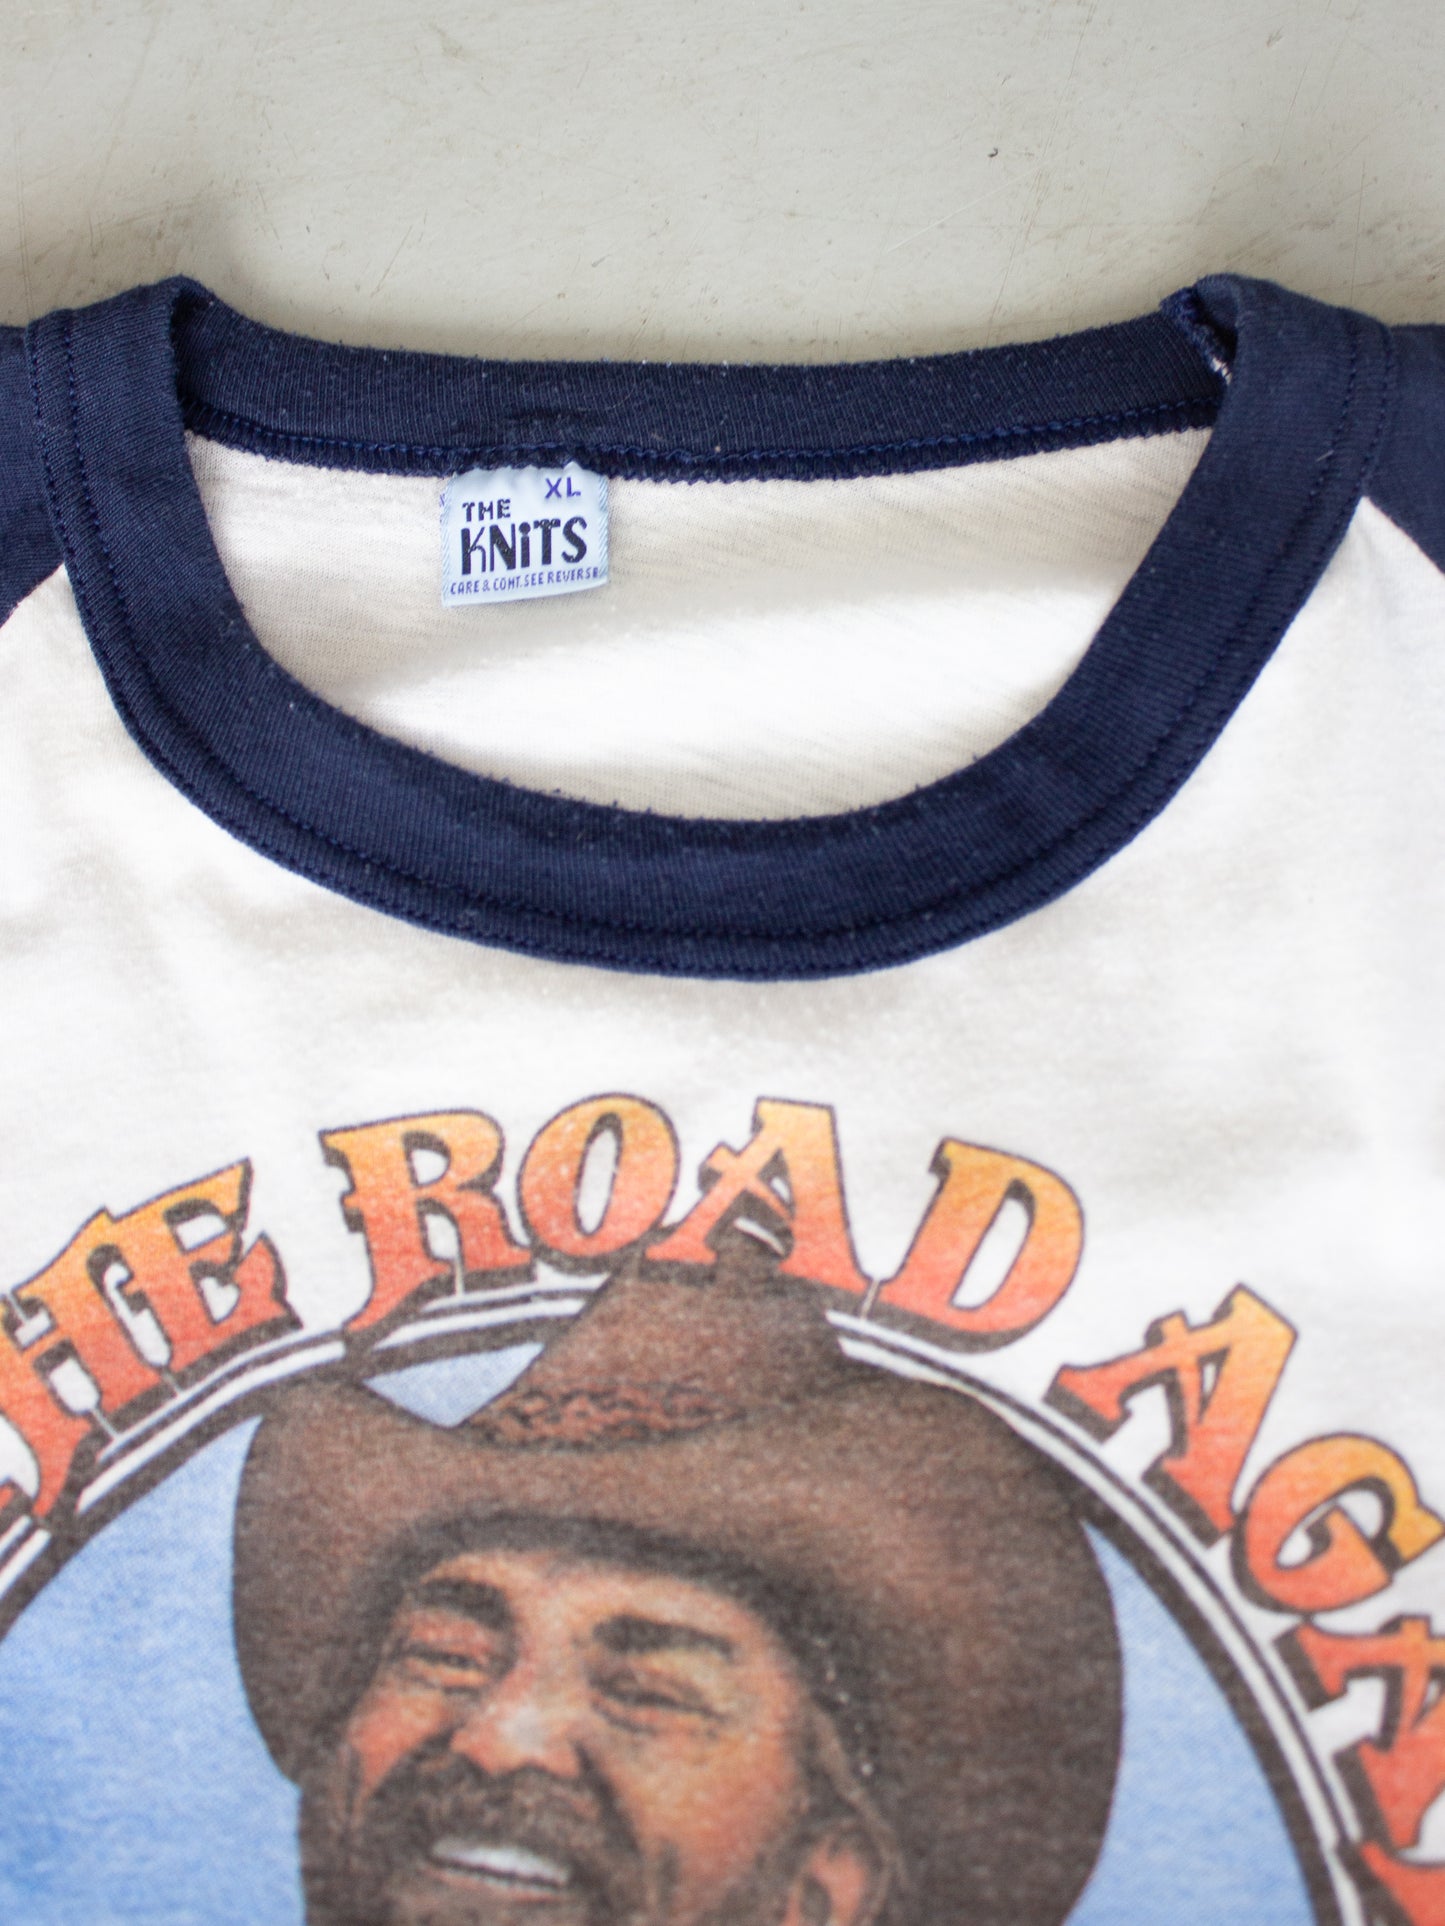 1980 Willie Nelson 'On The Road Again' White and Navy Raglan T-Shirt (Medium Large)